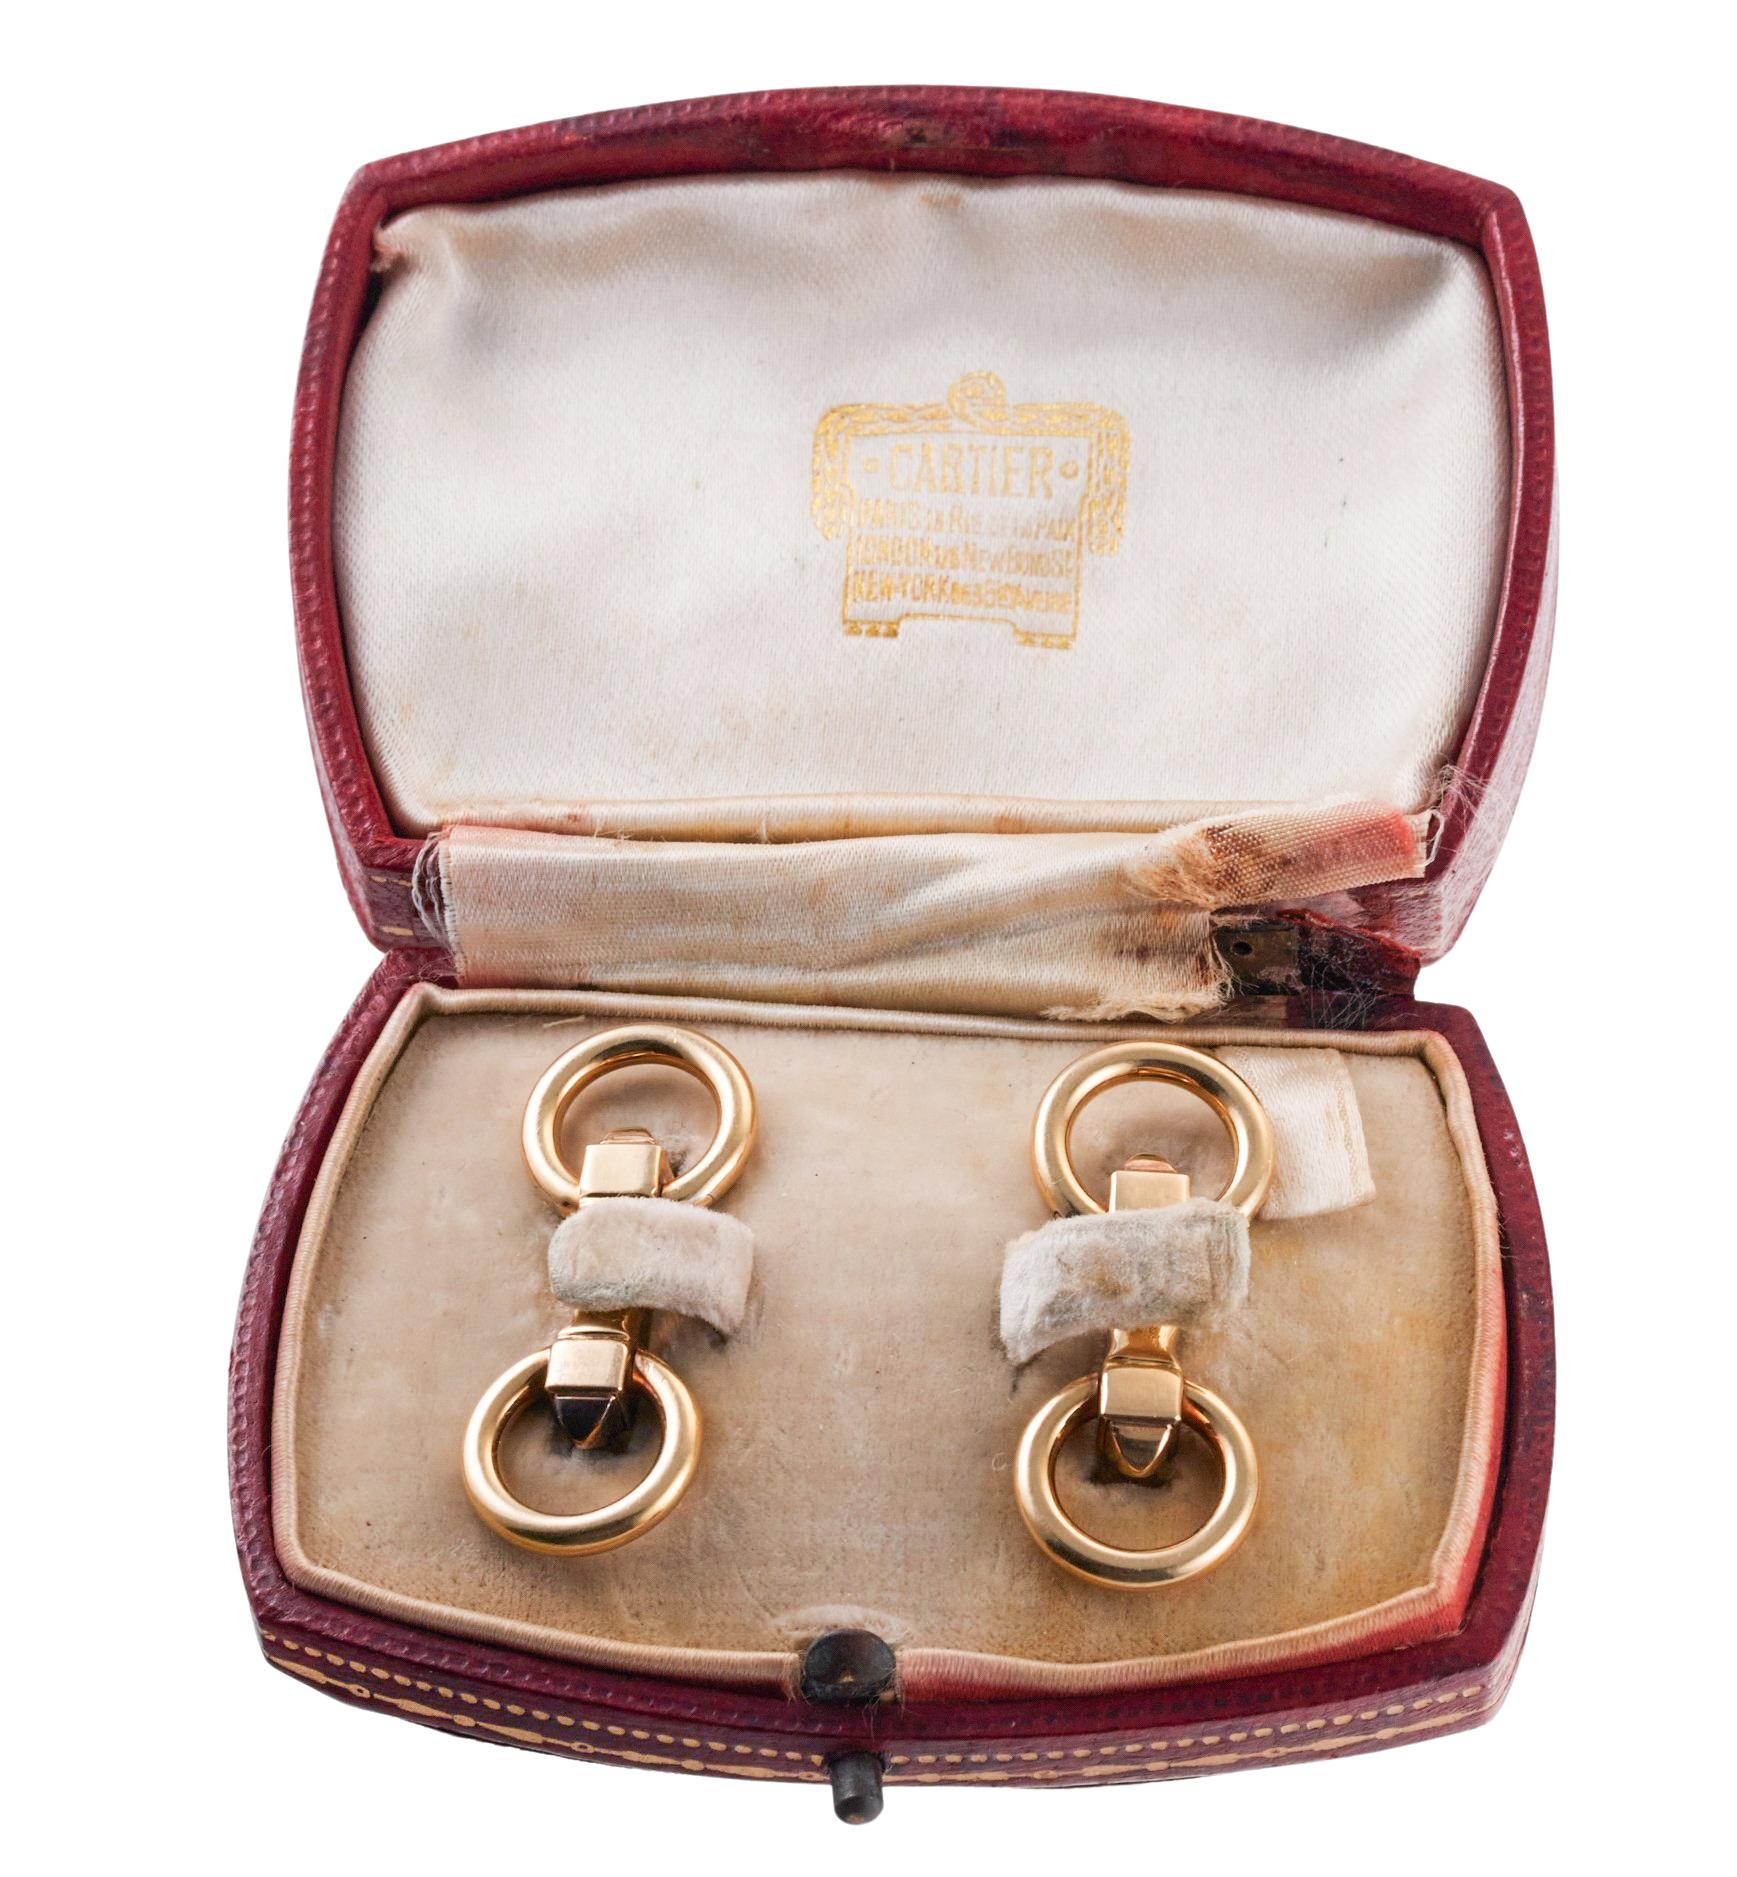 Cartier Paris Retro Gold Cufflinks In Excellent Condition For Sale In New York, NY